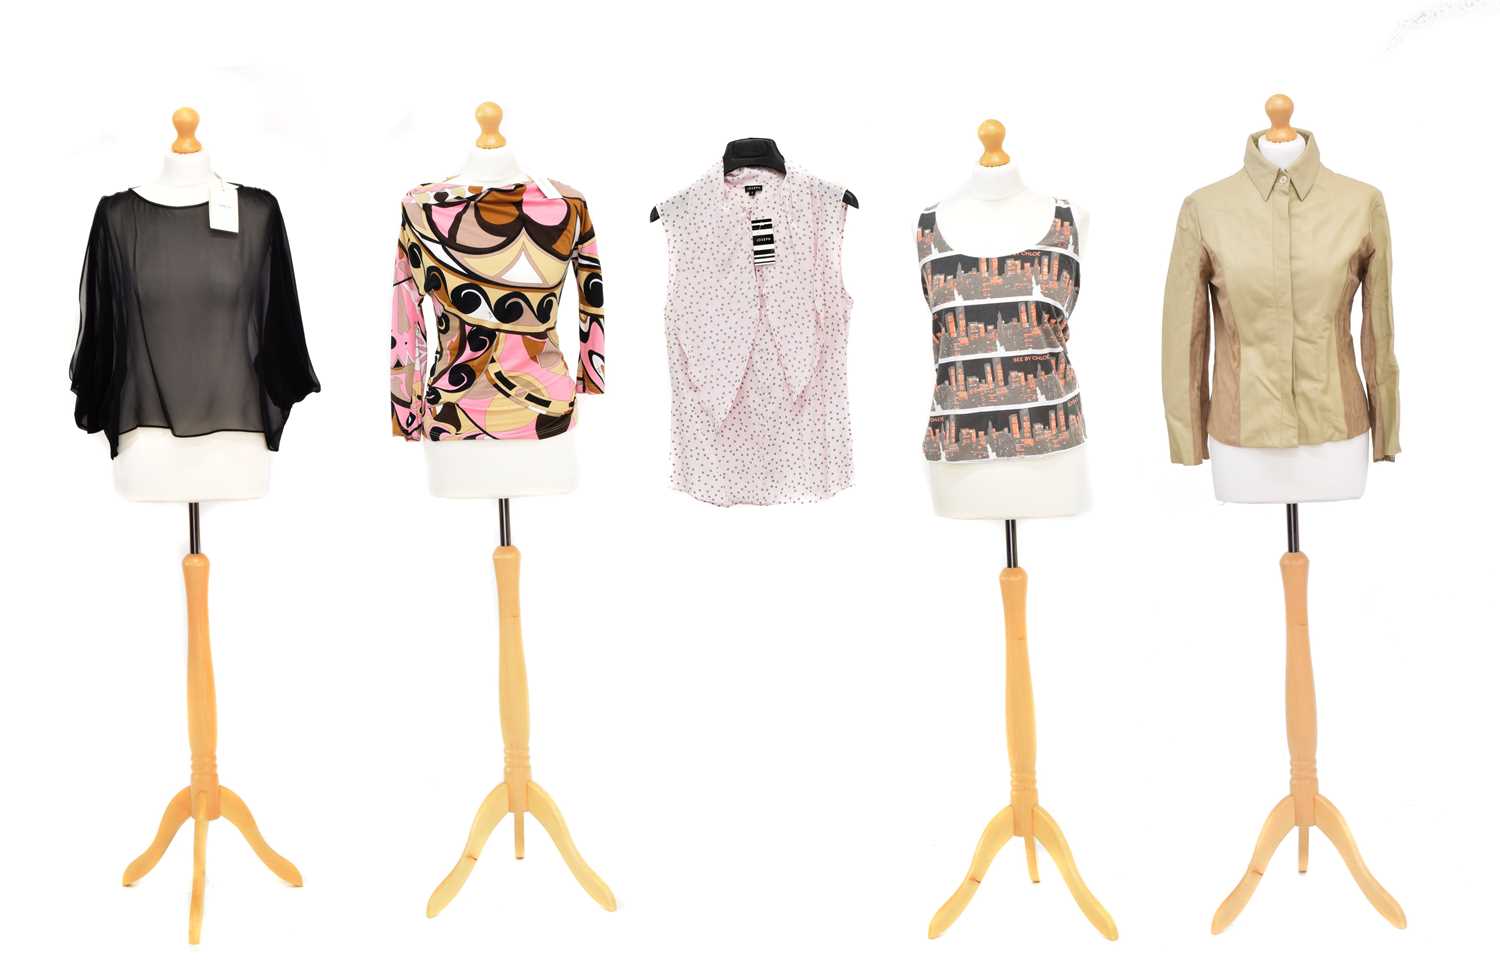 Lot A selection of designer tops